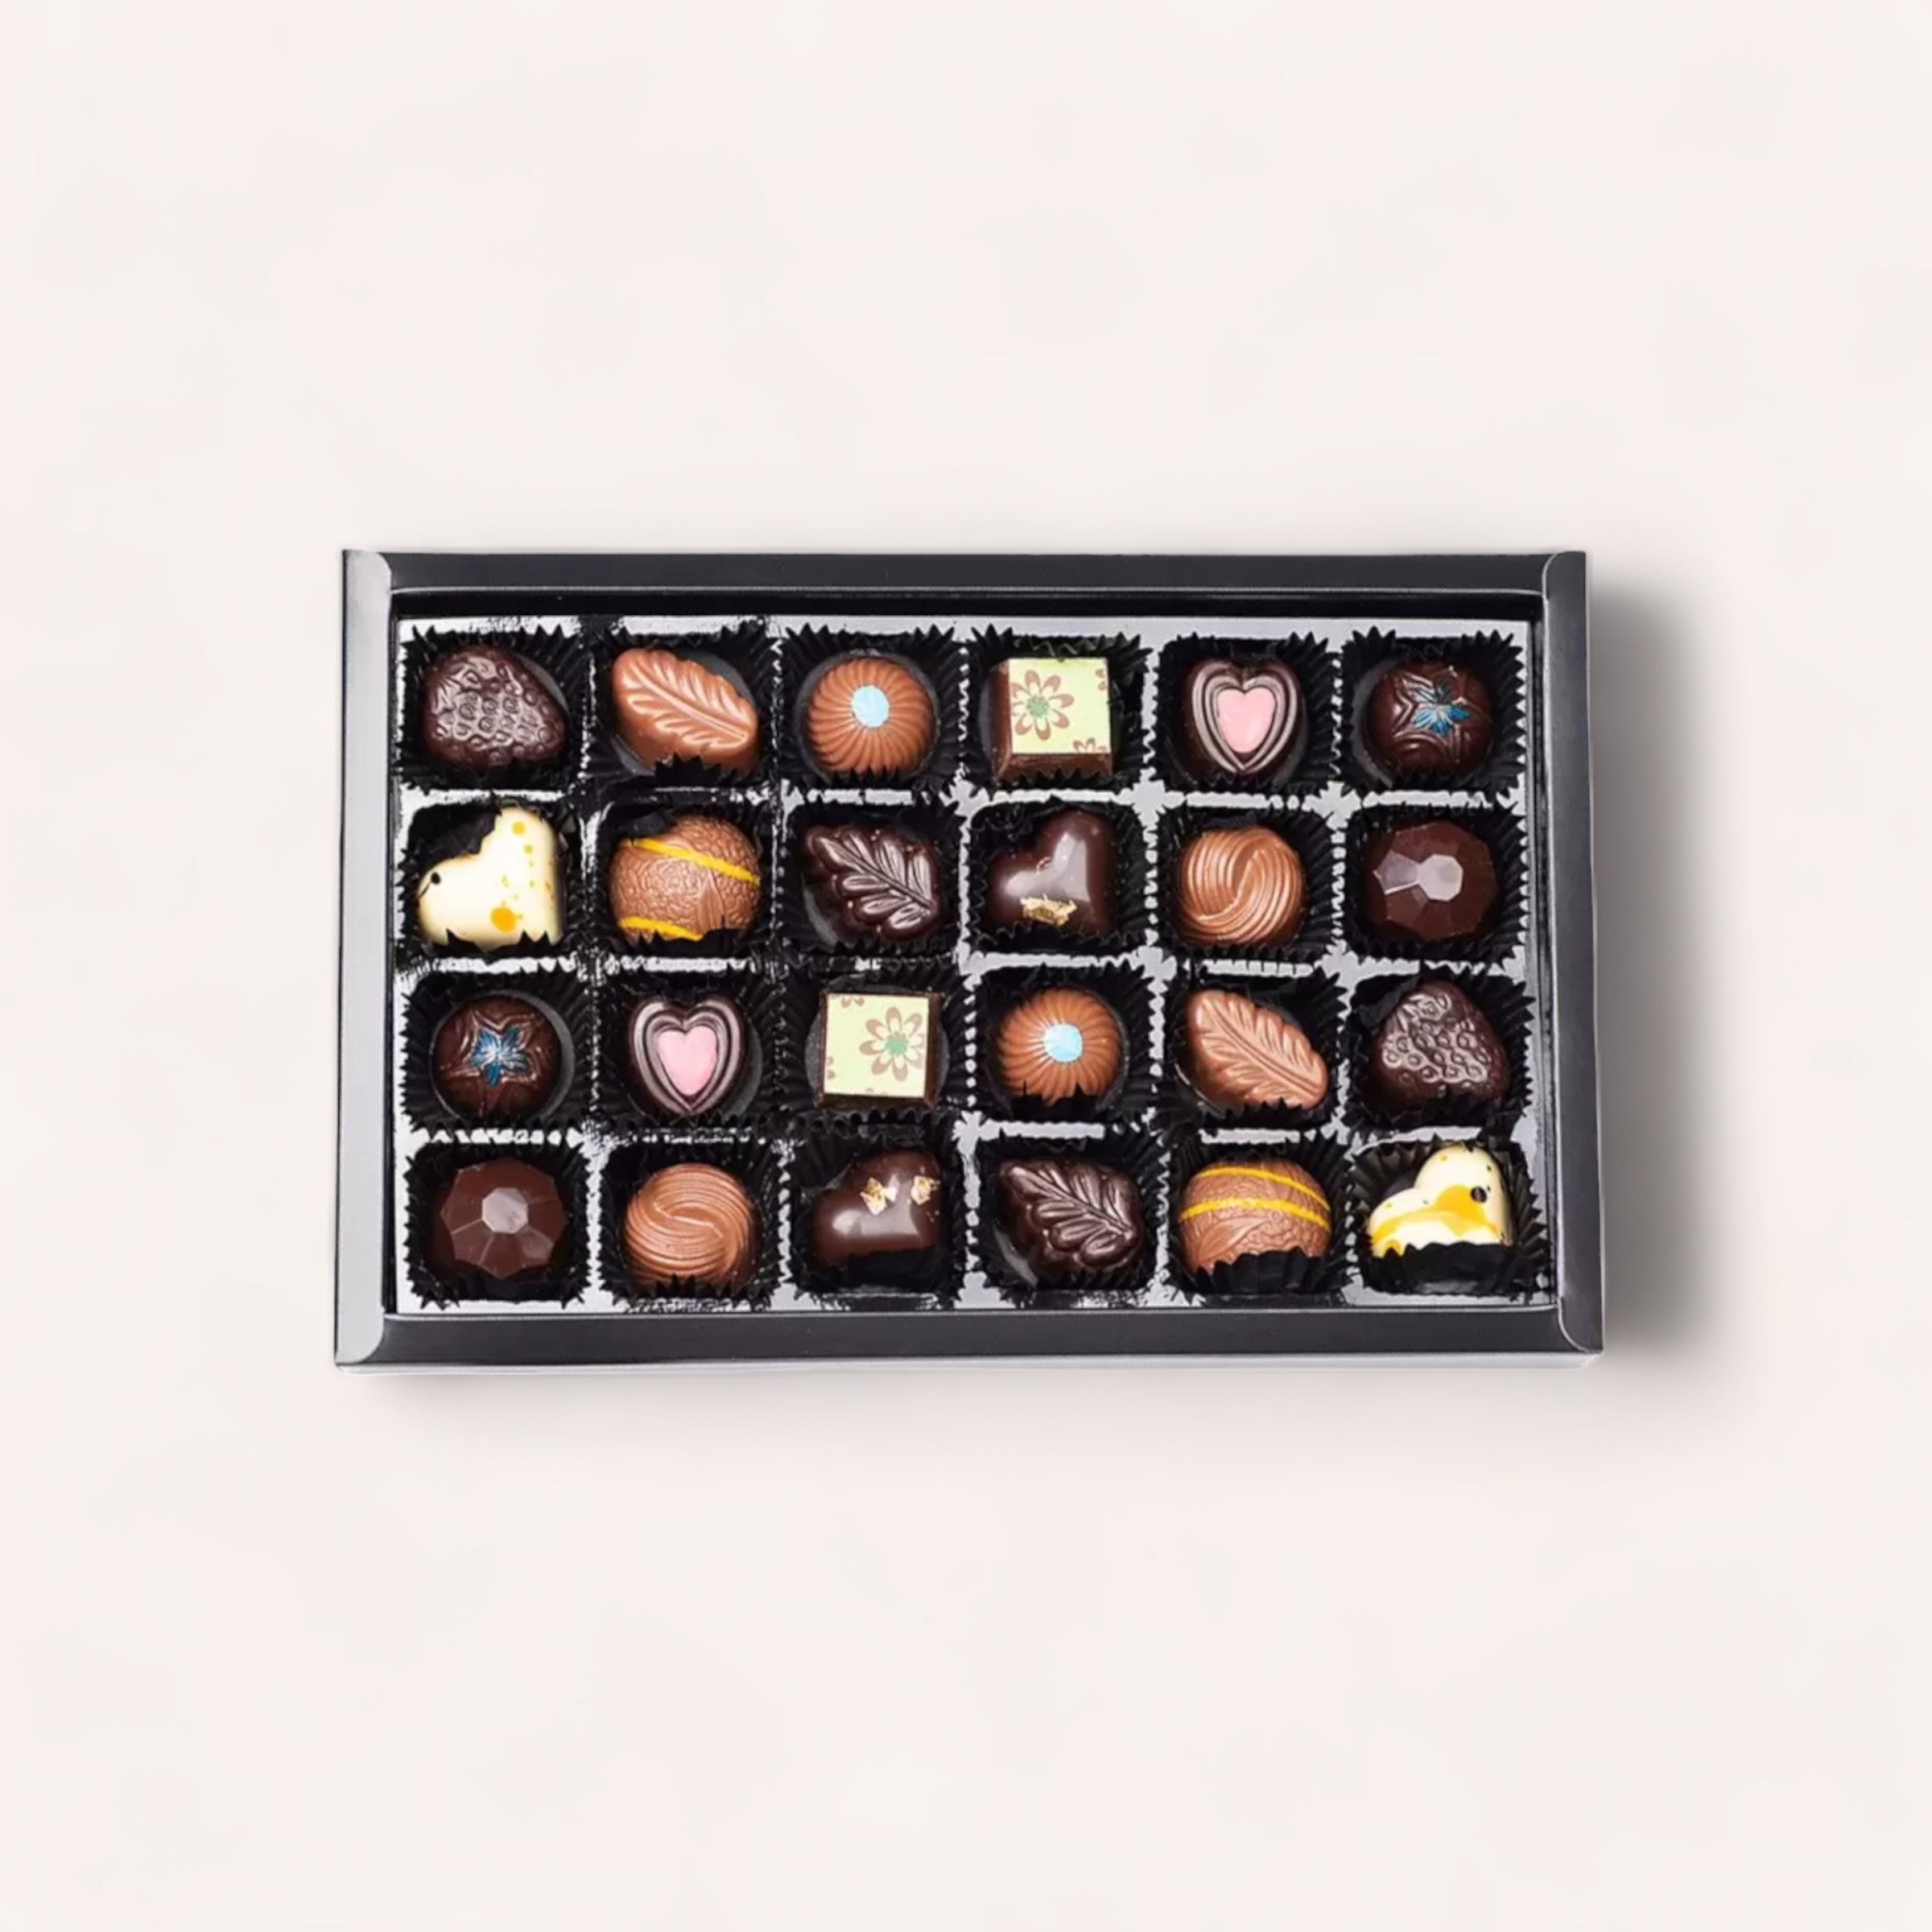 A 24 Piece Chocolate Gift Box by Chocolate Traders in various shapes and designs, including hearts and swirls, displayed neatly against a light background.